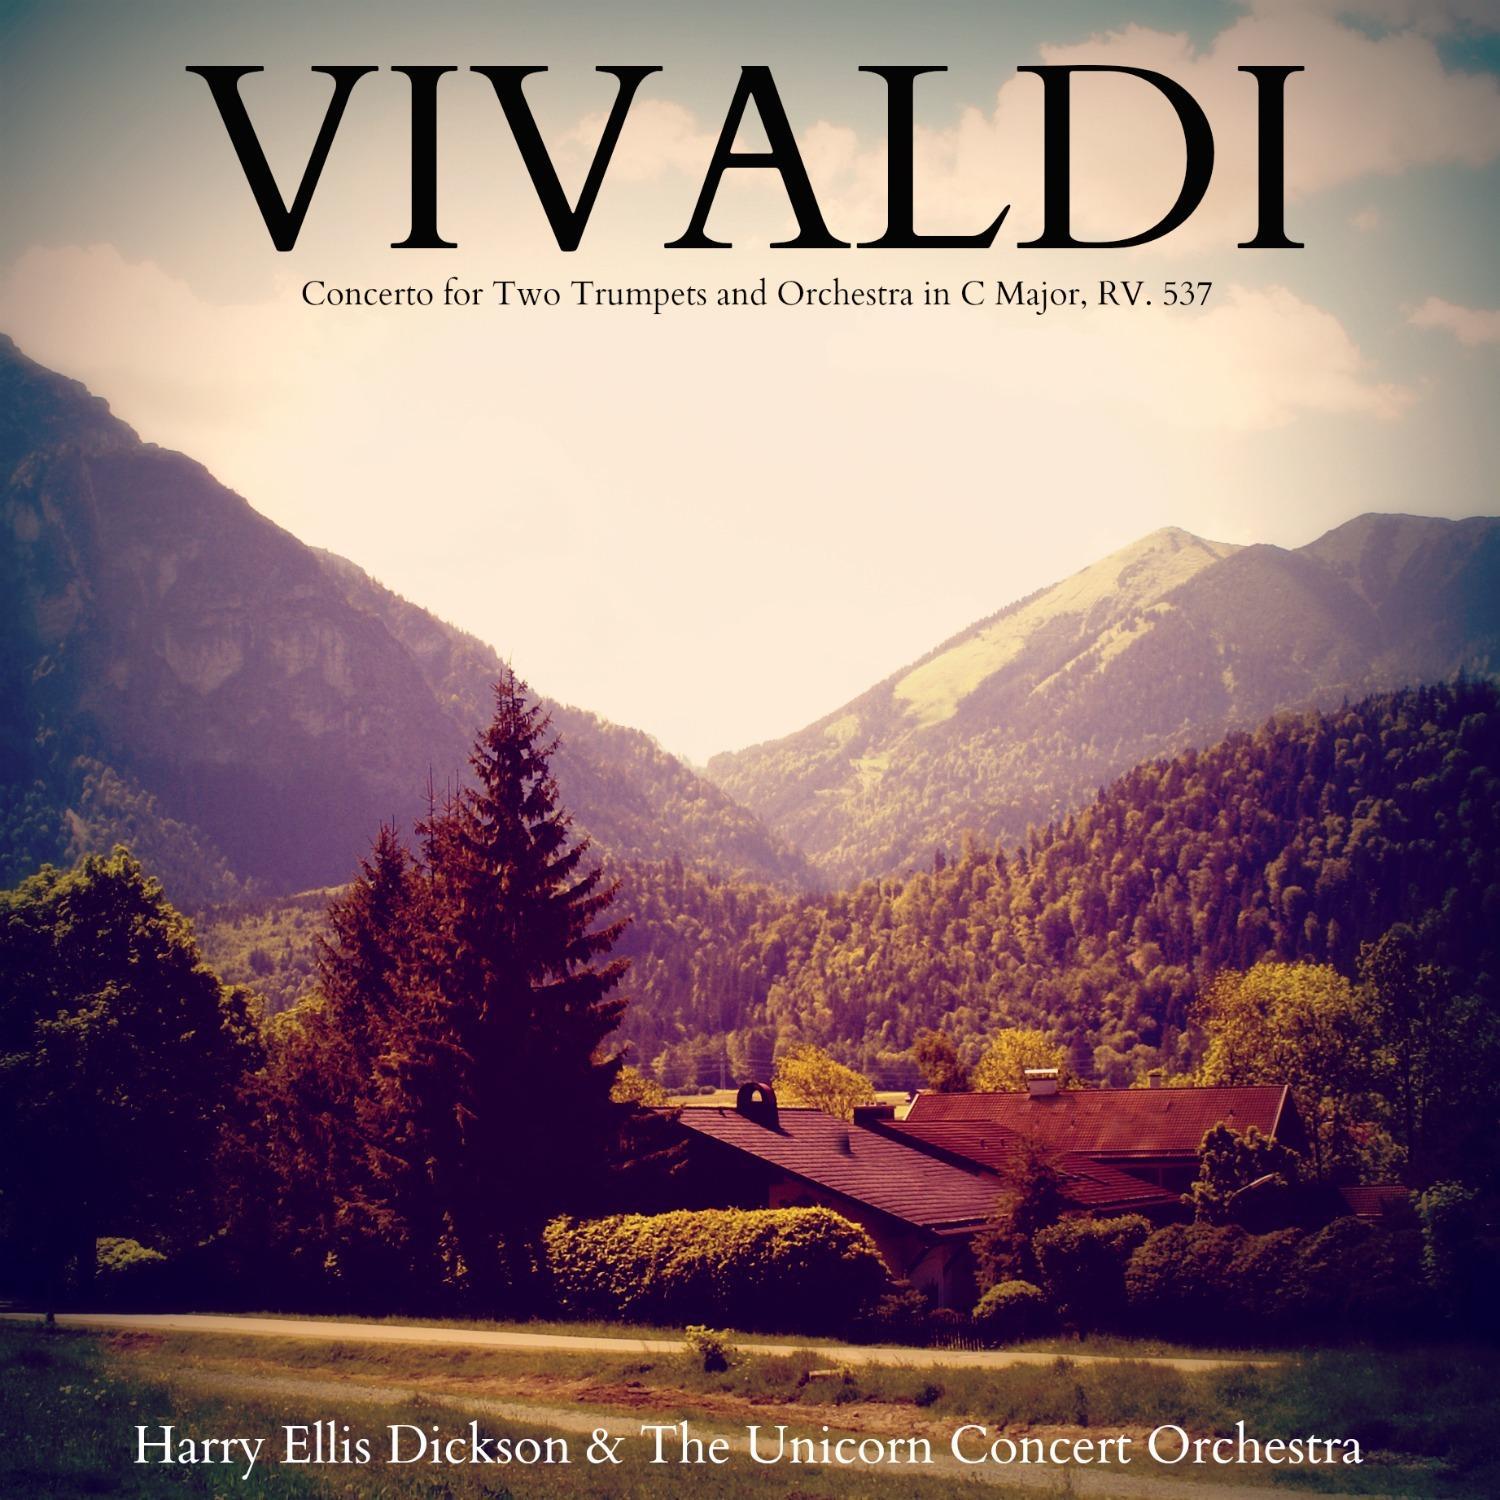 Concerto for Two Trumpets and Orchestra in C Major, RV. 537: Allegro